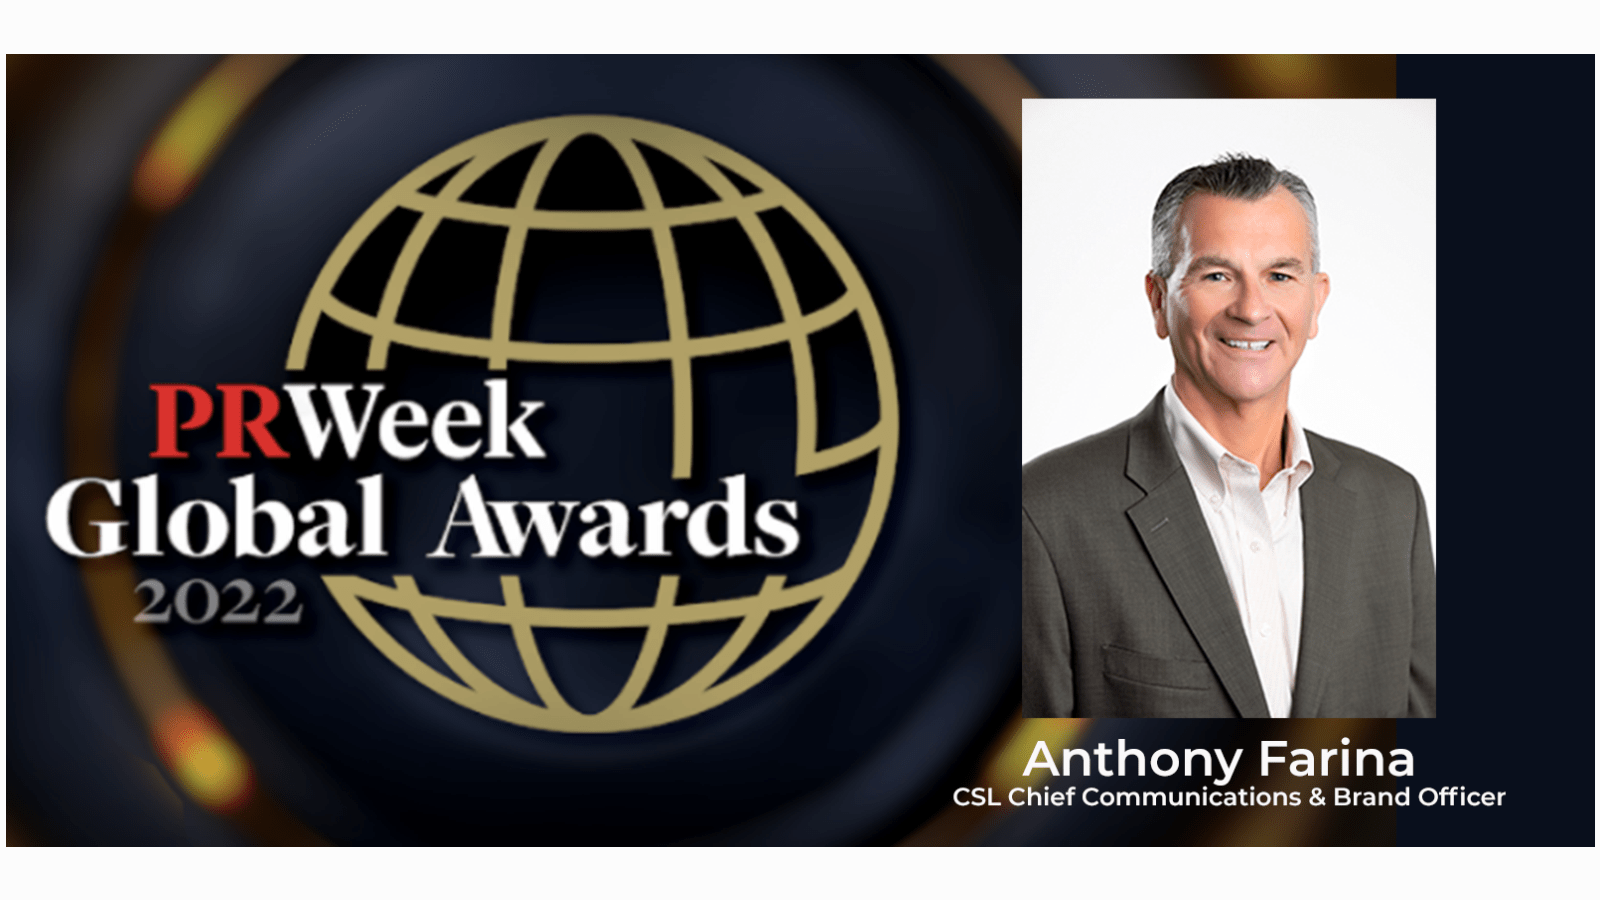 Anthony Farina, CSL Chief Communications Officer is on the short list for PR Week's Global Awards 2022